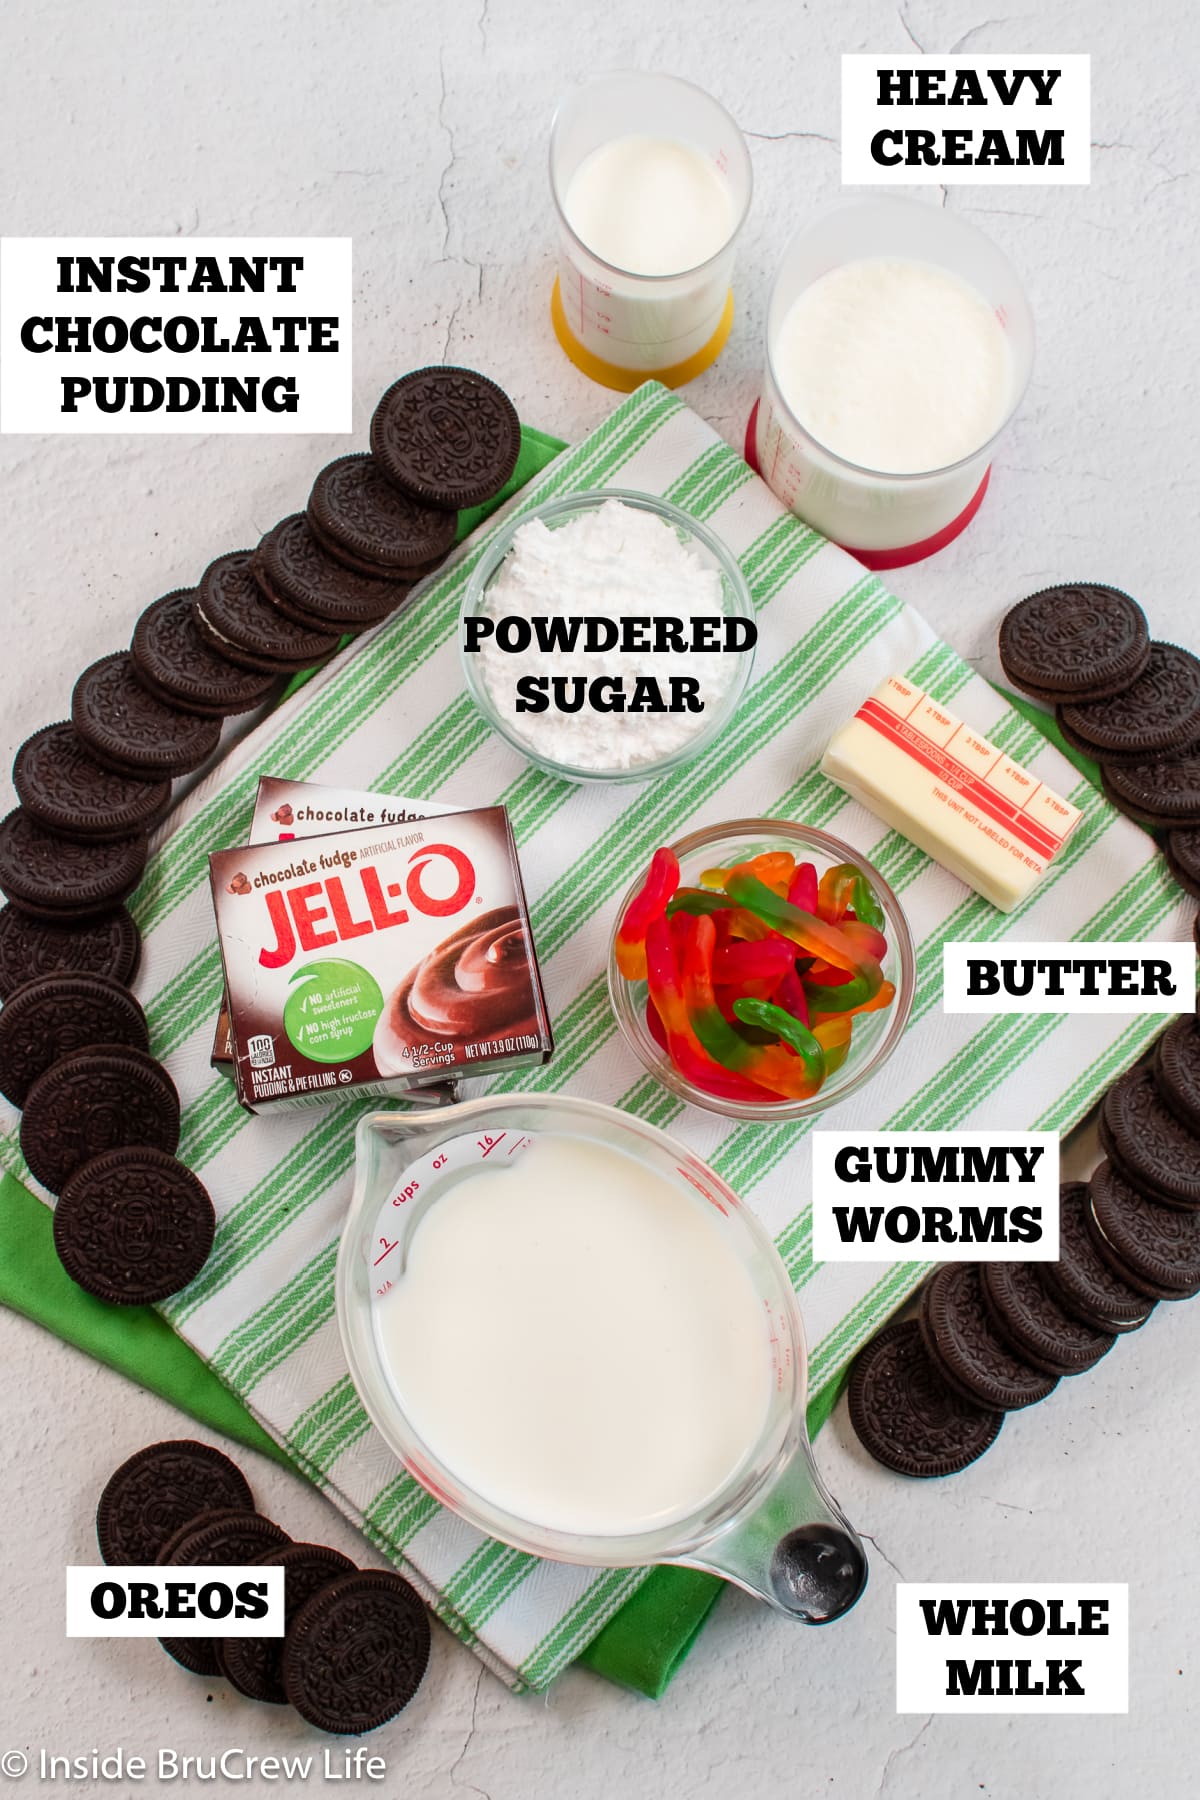 Bowls of ingredients needed to make a pudding pie with Oreos and gummy worms.